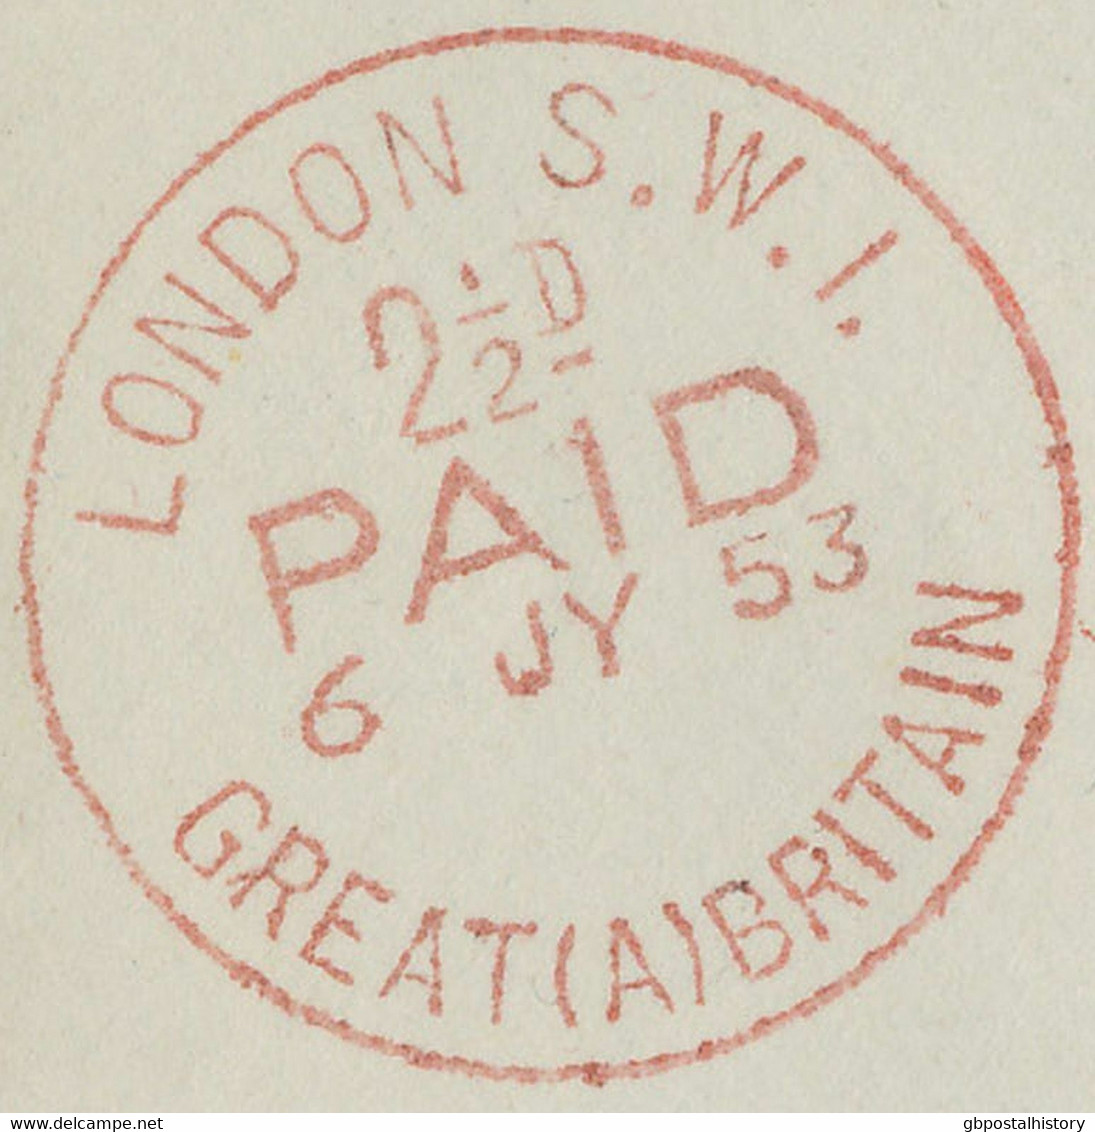 GB "LONDON S.W.I. / 2 1/2 D. / PAID / 6 JY 53 / GREAT (A) BRITAIN" Roter CDS Cvr - Servizio